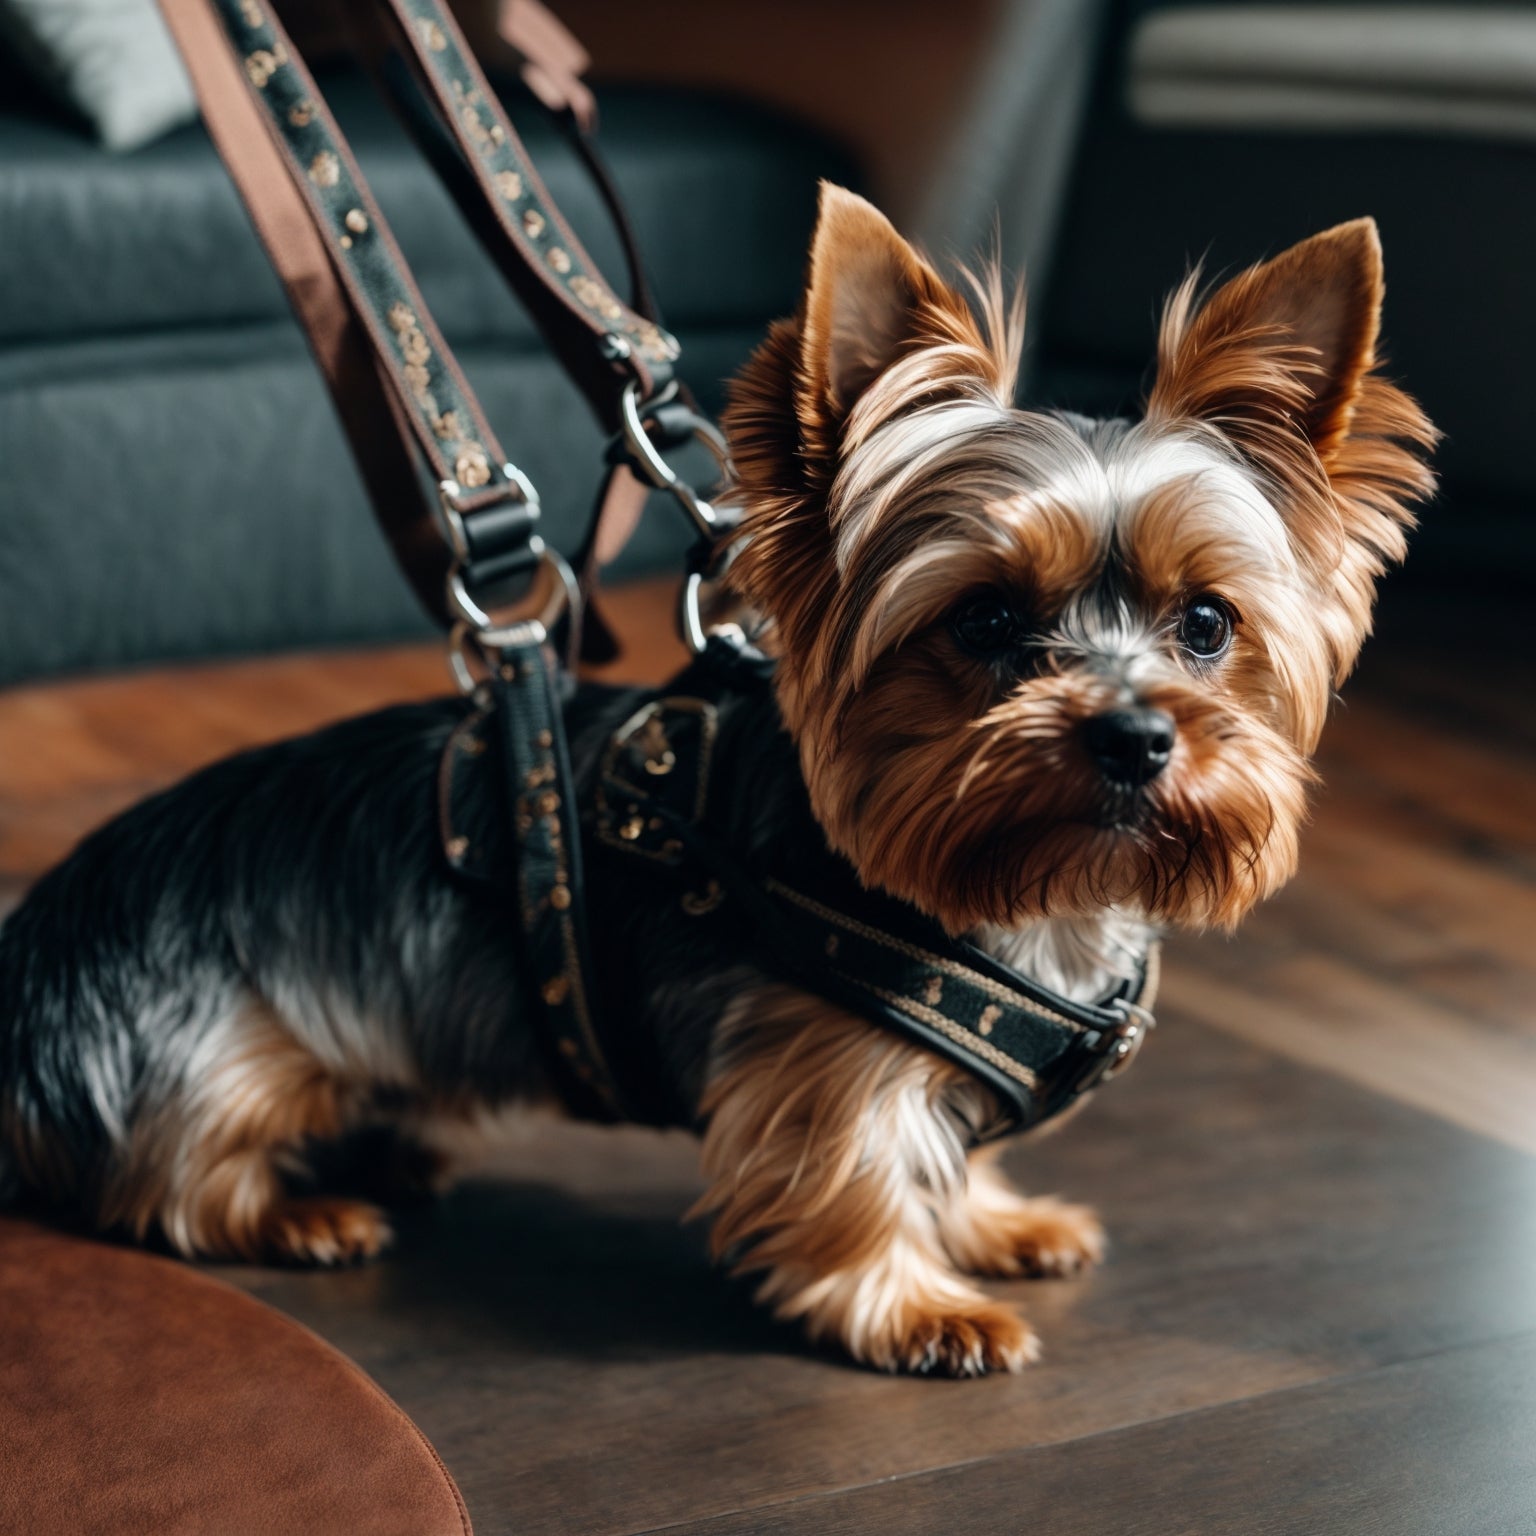 What is the Safest Leash Style for Dogs?